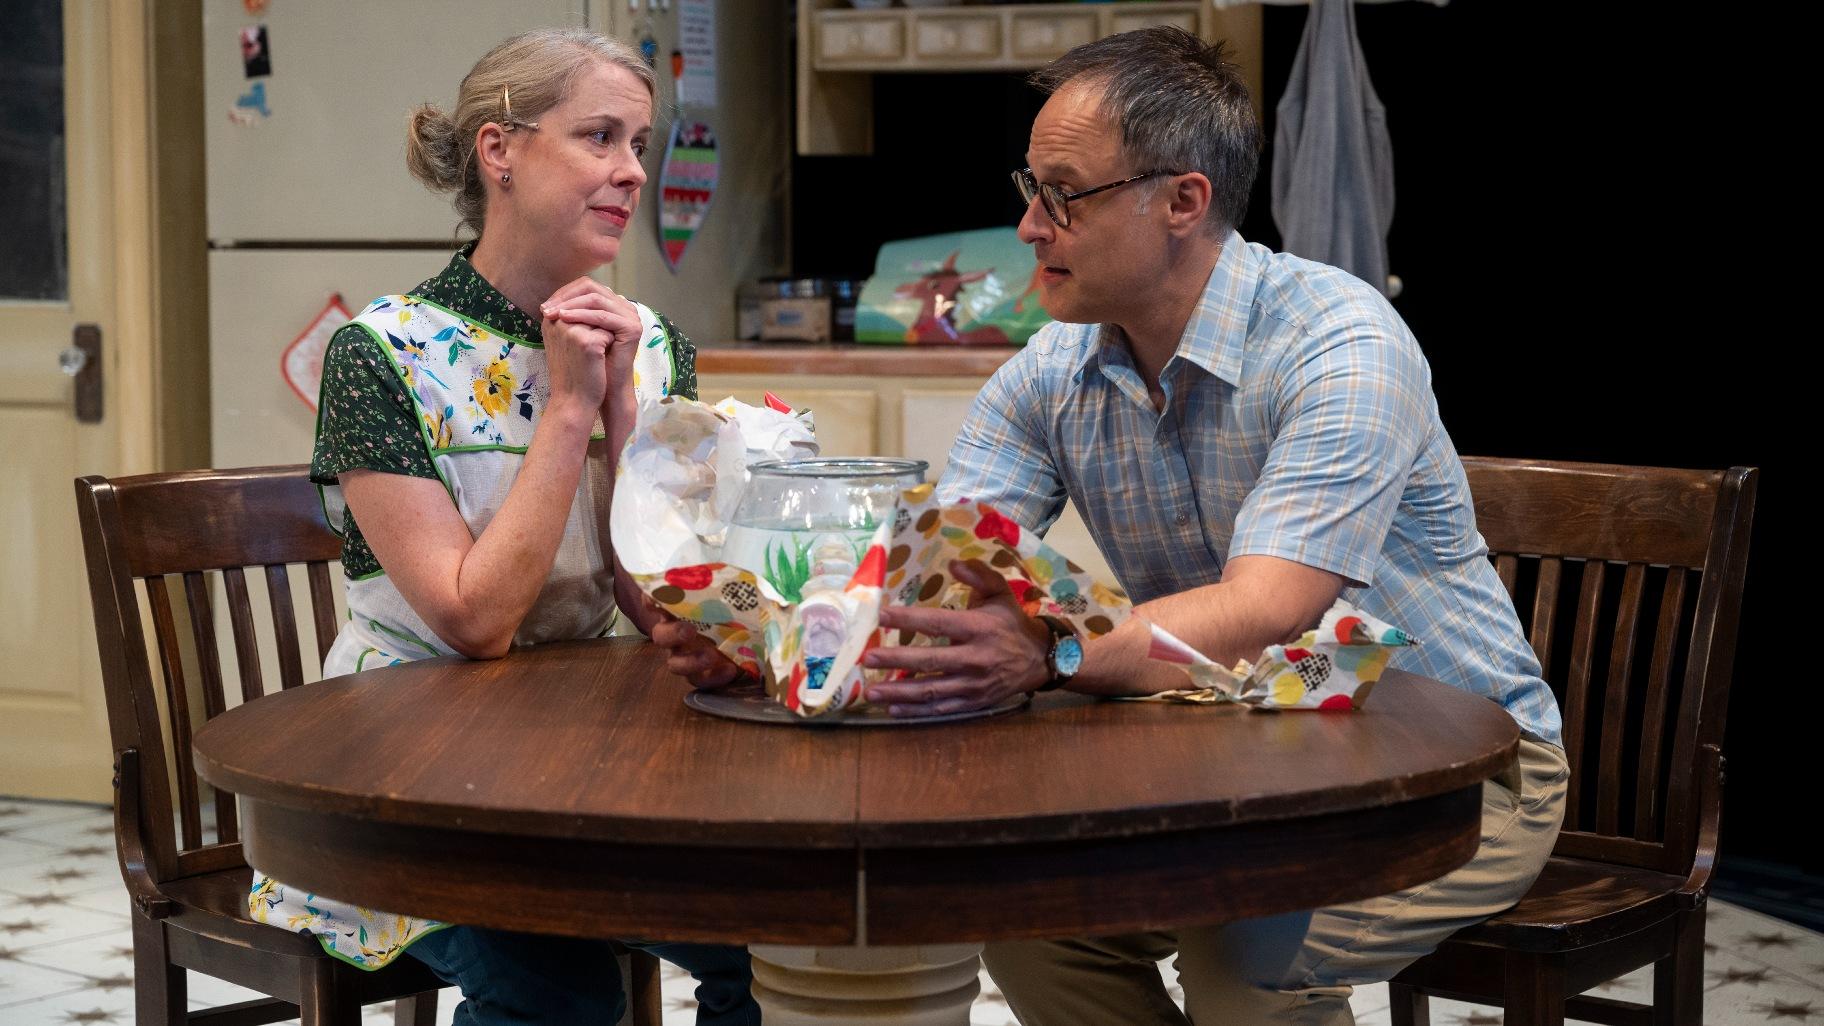 Kate Fry and Timothy Edward Kane in “Birthday Candles” at the Northlight Theatre. (Credit: Michael Brosilow)